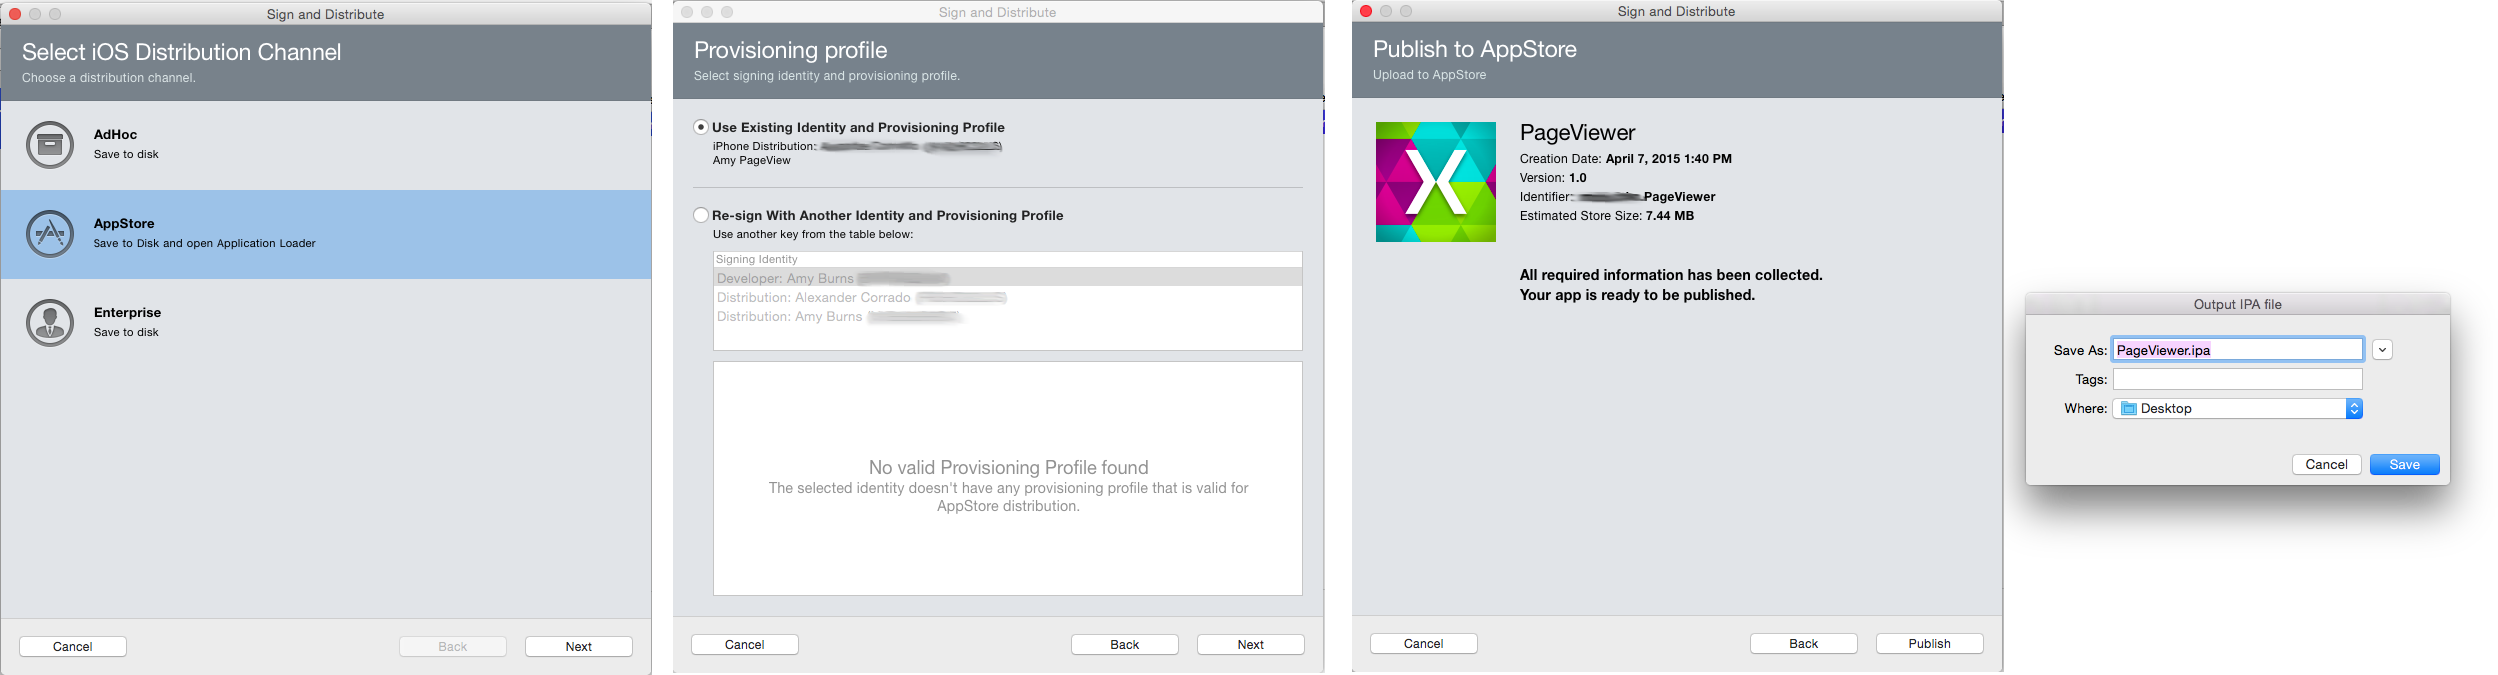 Select your signing identity and provisioning profile, or re-sign with another identity